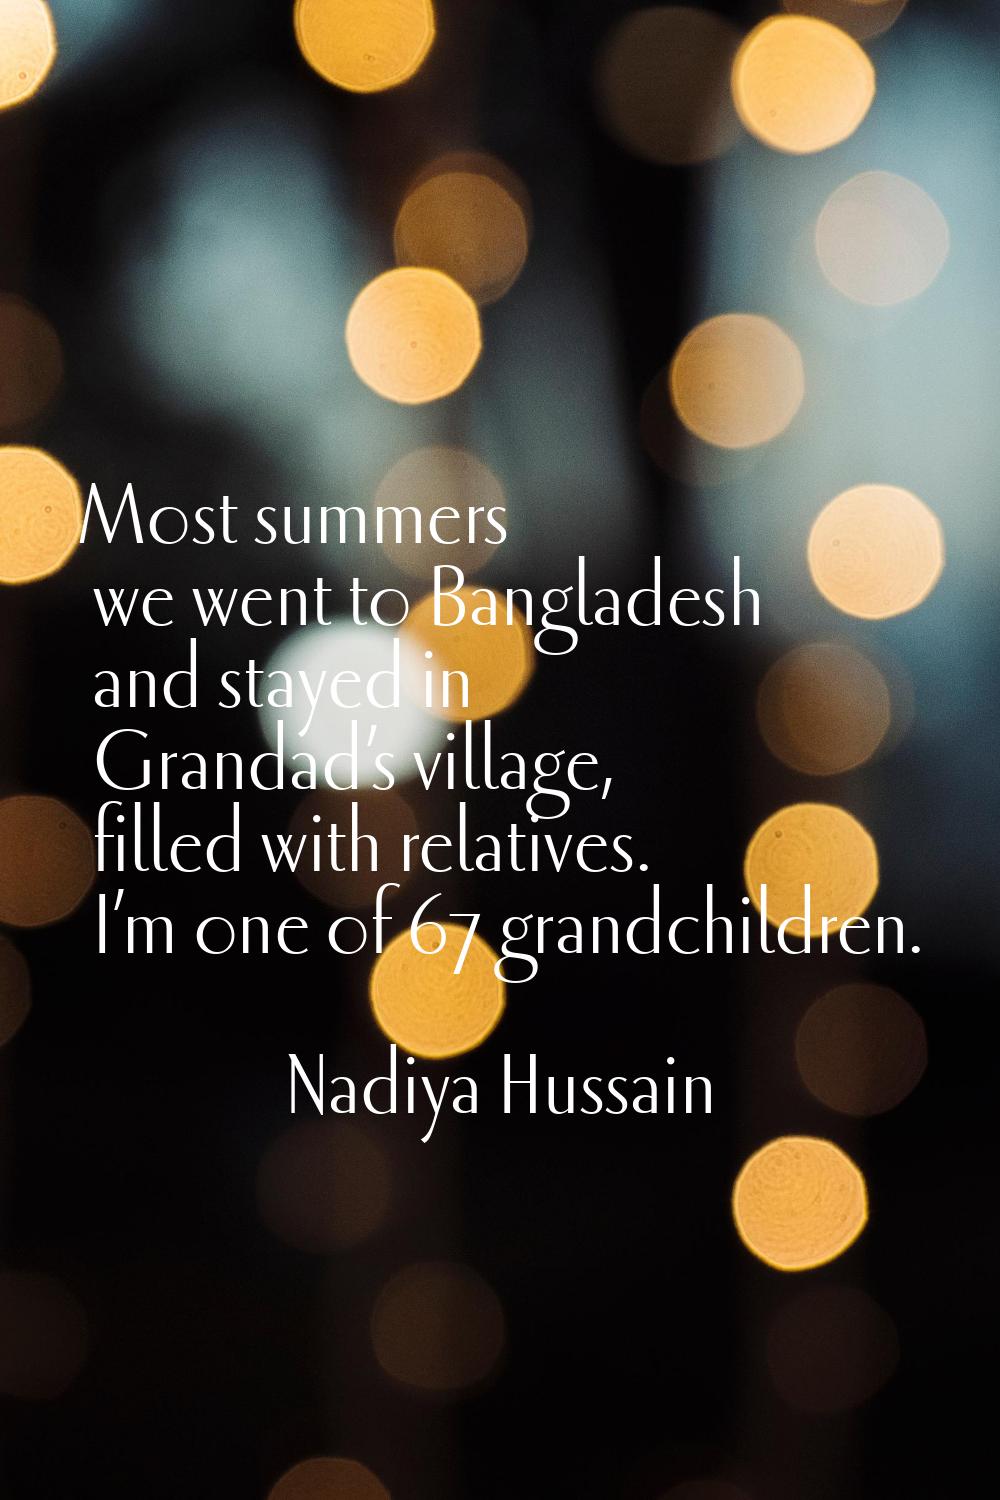 Most summers we went to Bangladesh and stayed in Grandad’s village, filled with relatives. I’m one 